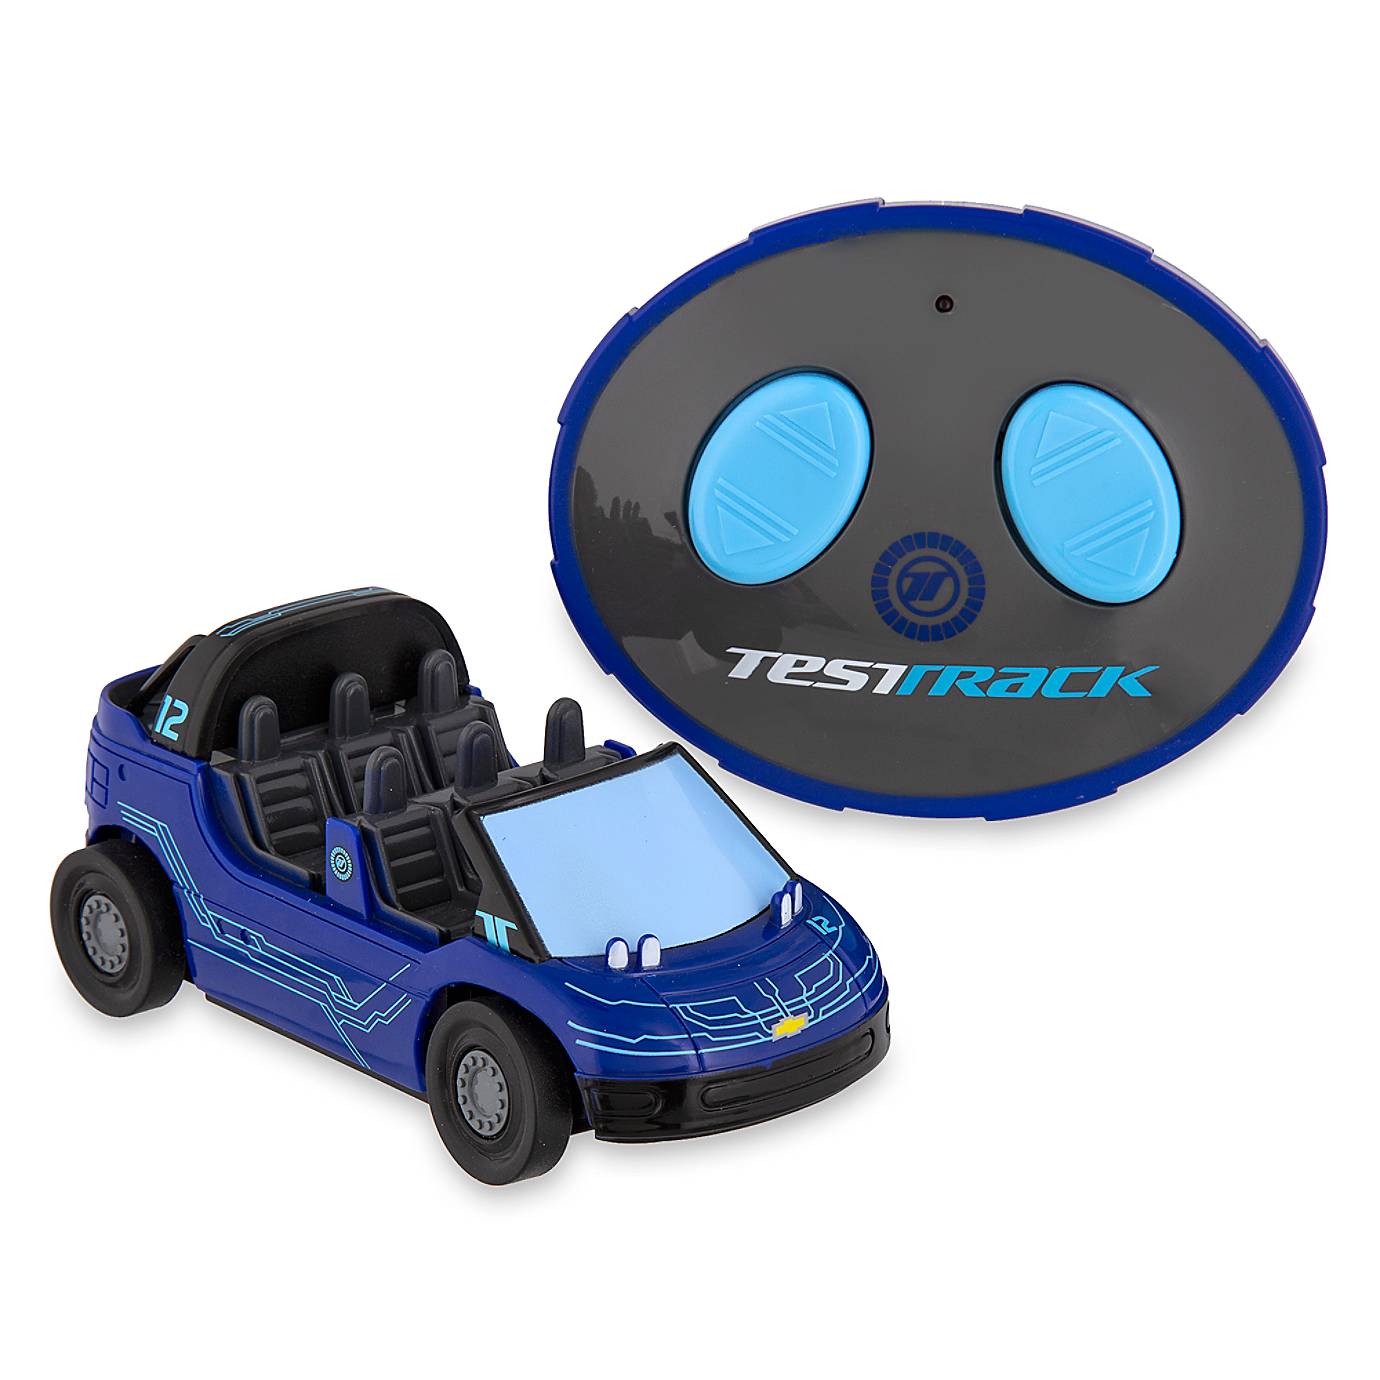 Disney Parks Test Track Radio Control Vehicle Vehicle and Remote Control New